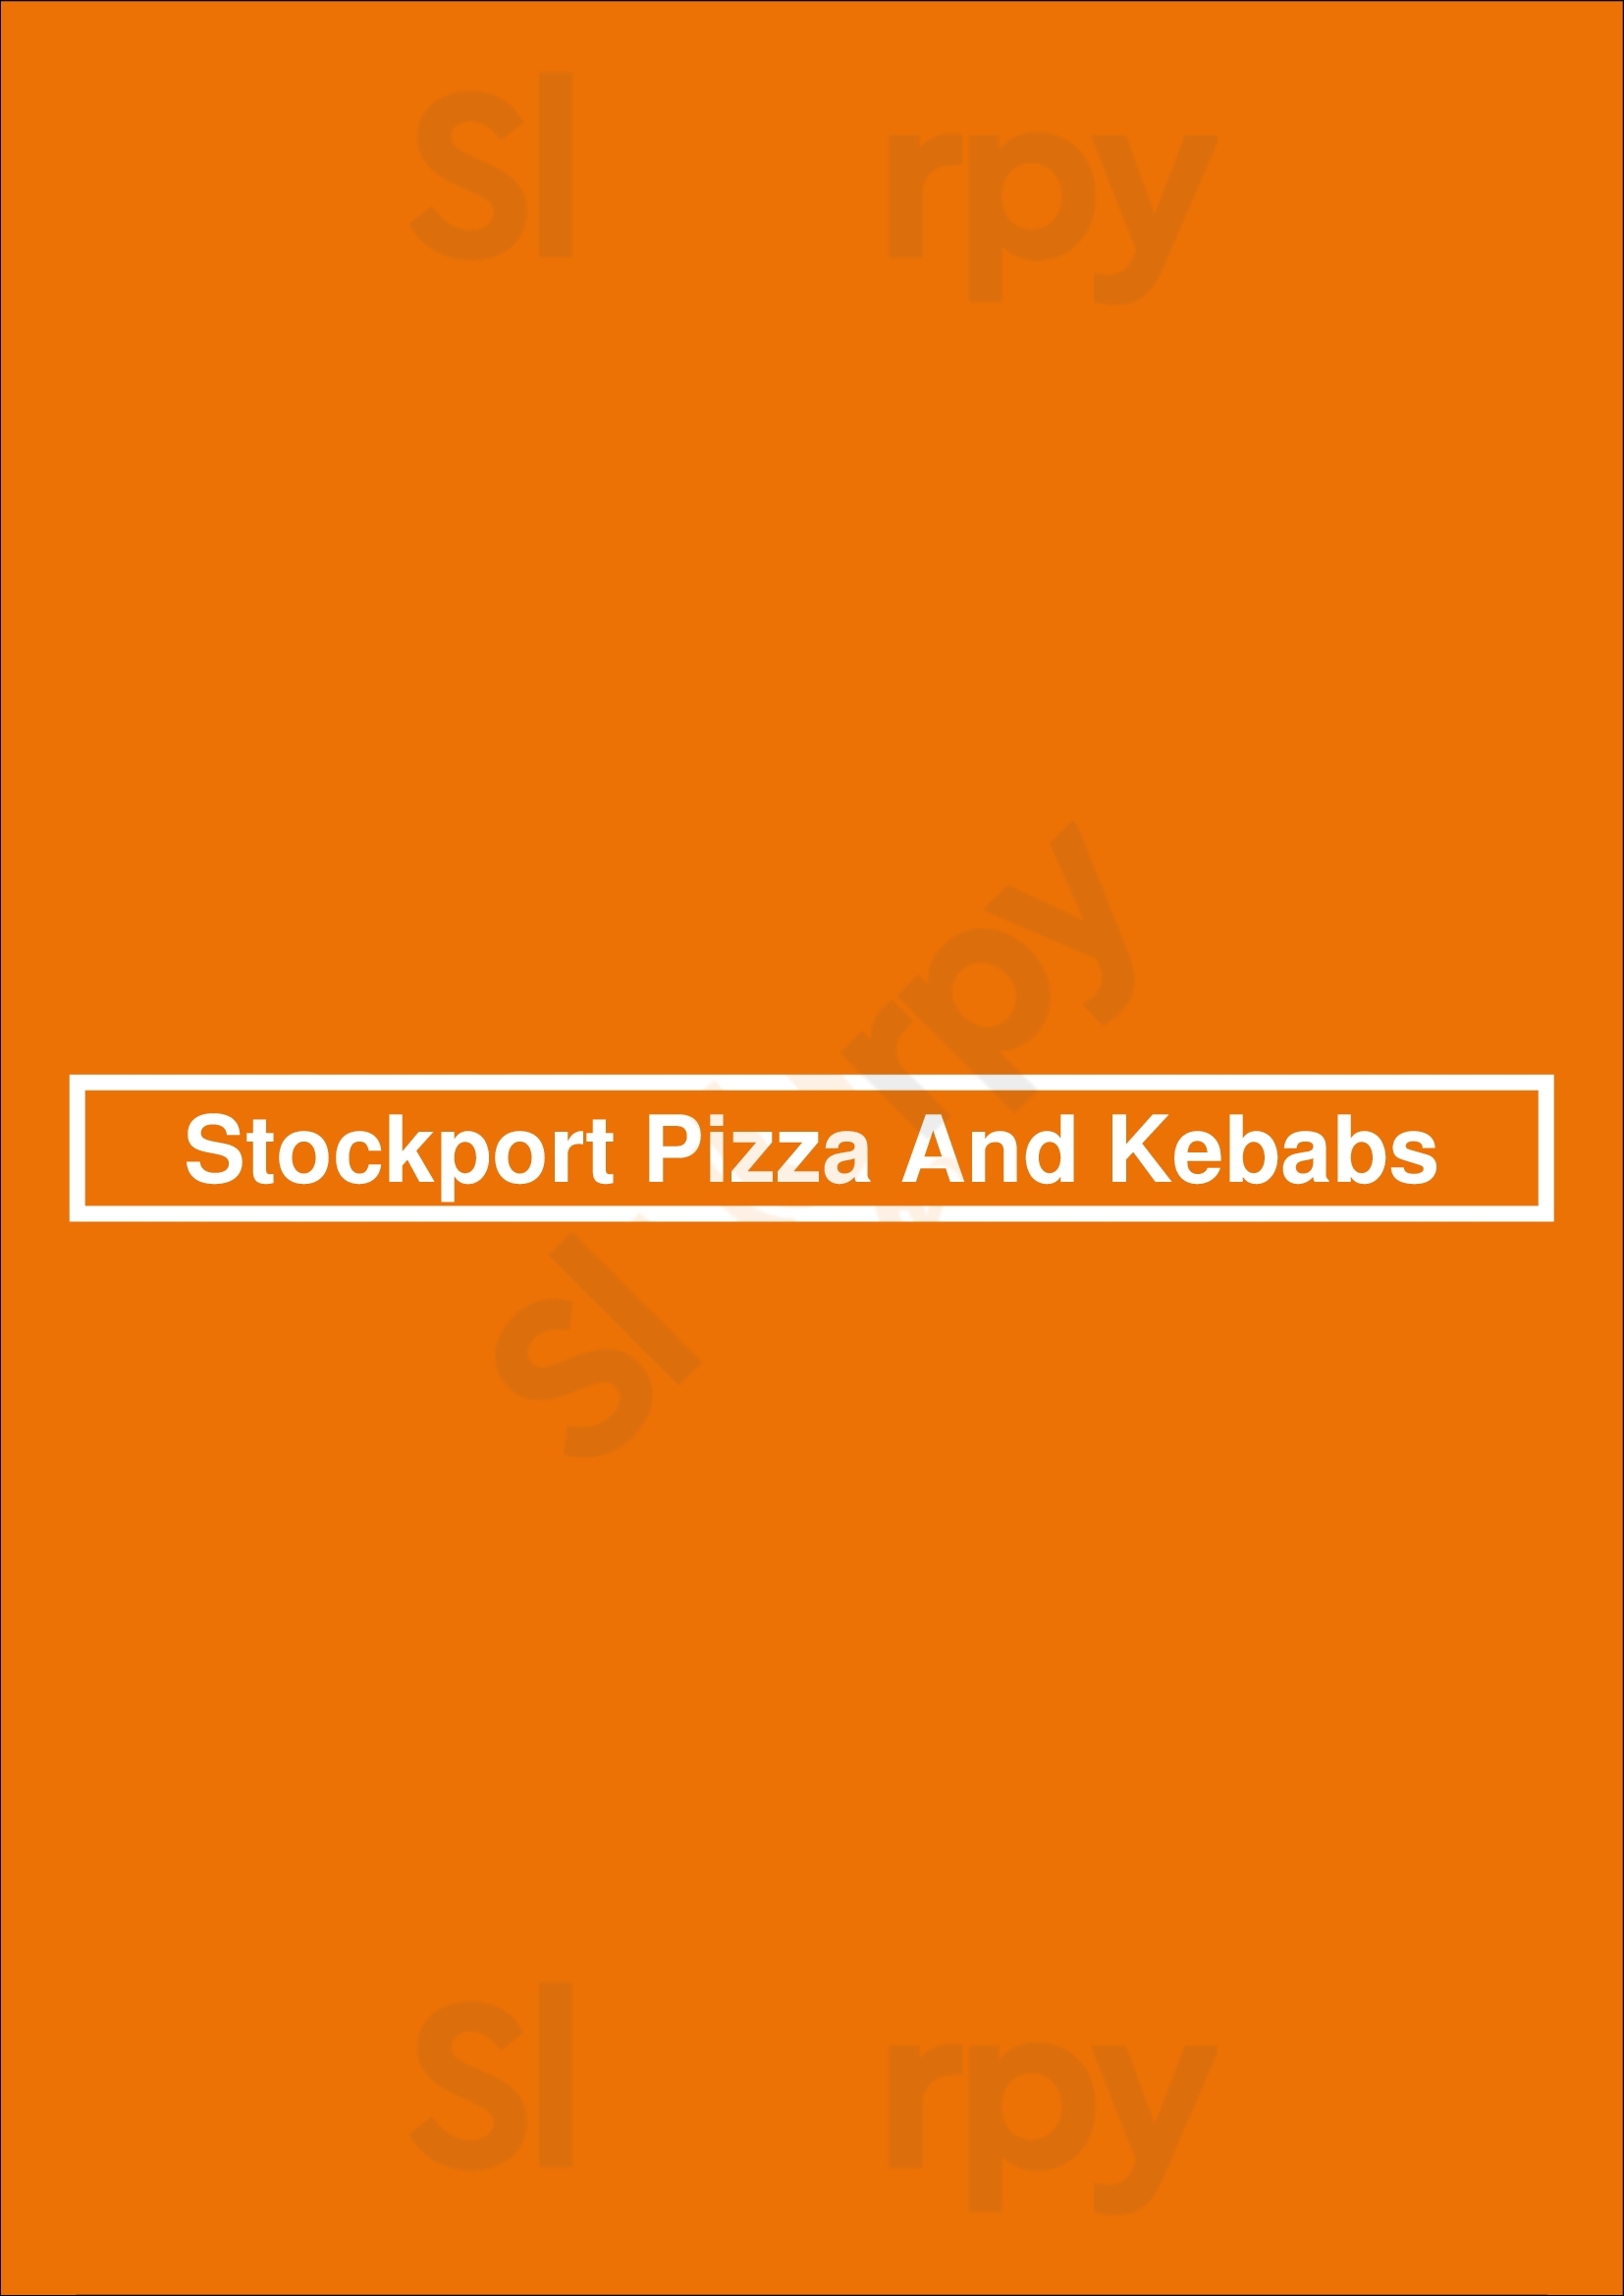 Stockport Pizza And Kebabs Stockport Menu - 1